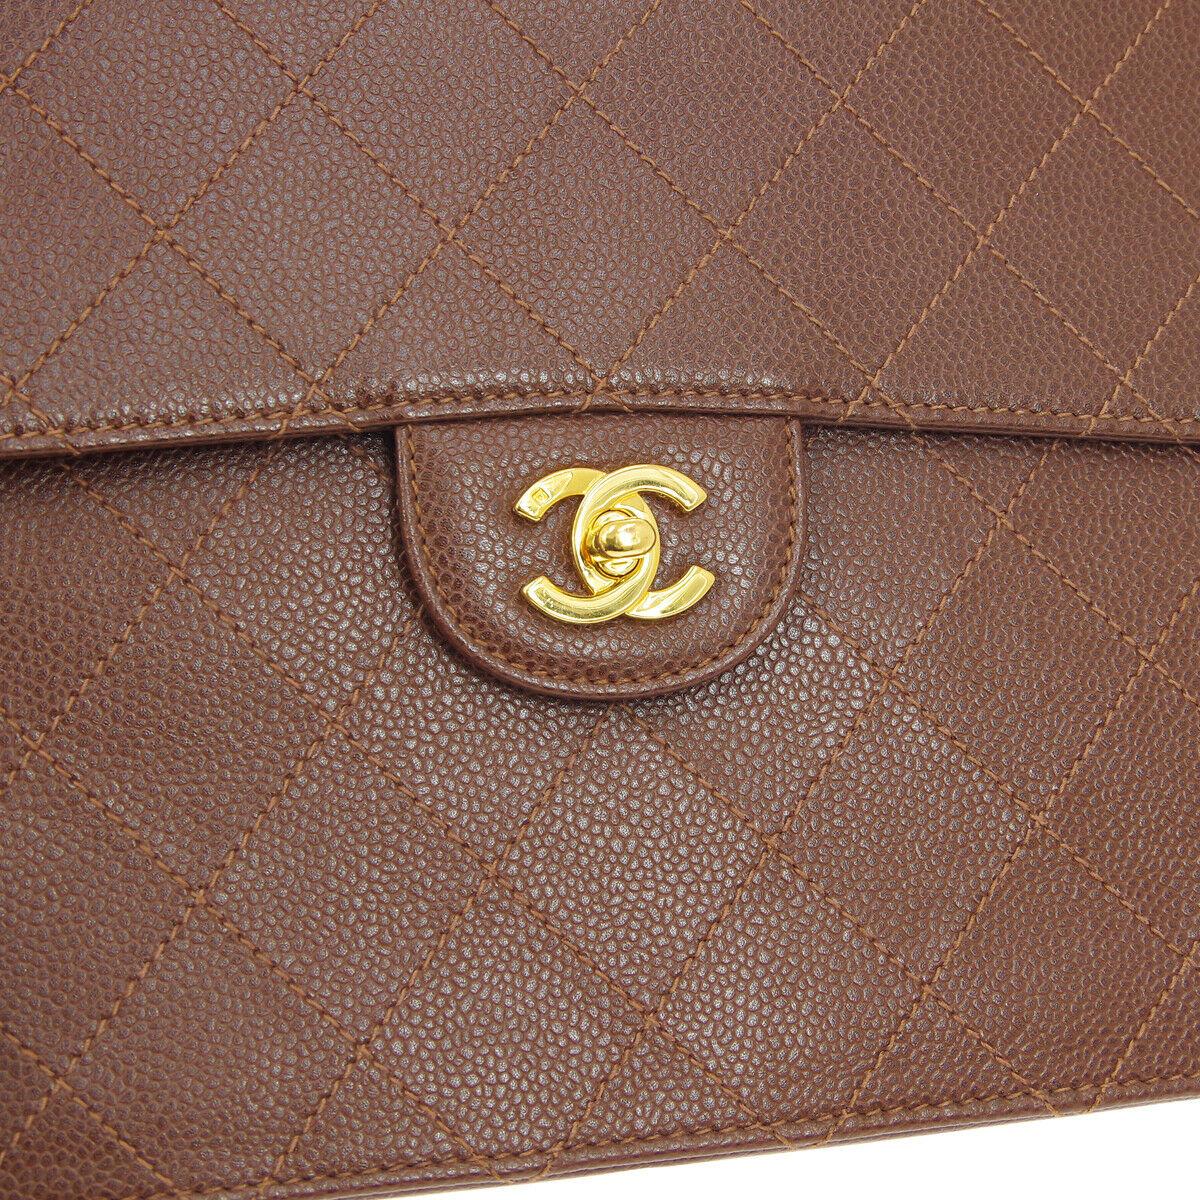 Chanel Cognac Chocolate Leather Gold Large Jumbo Evening Shoulder Flap Bag

Caviar leather
Gold tone hardware
Leather lining
Made in France
Shoulder strap drop 19.5